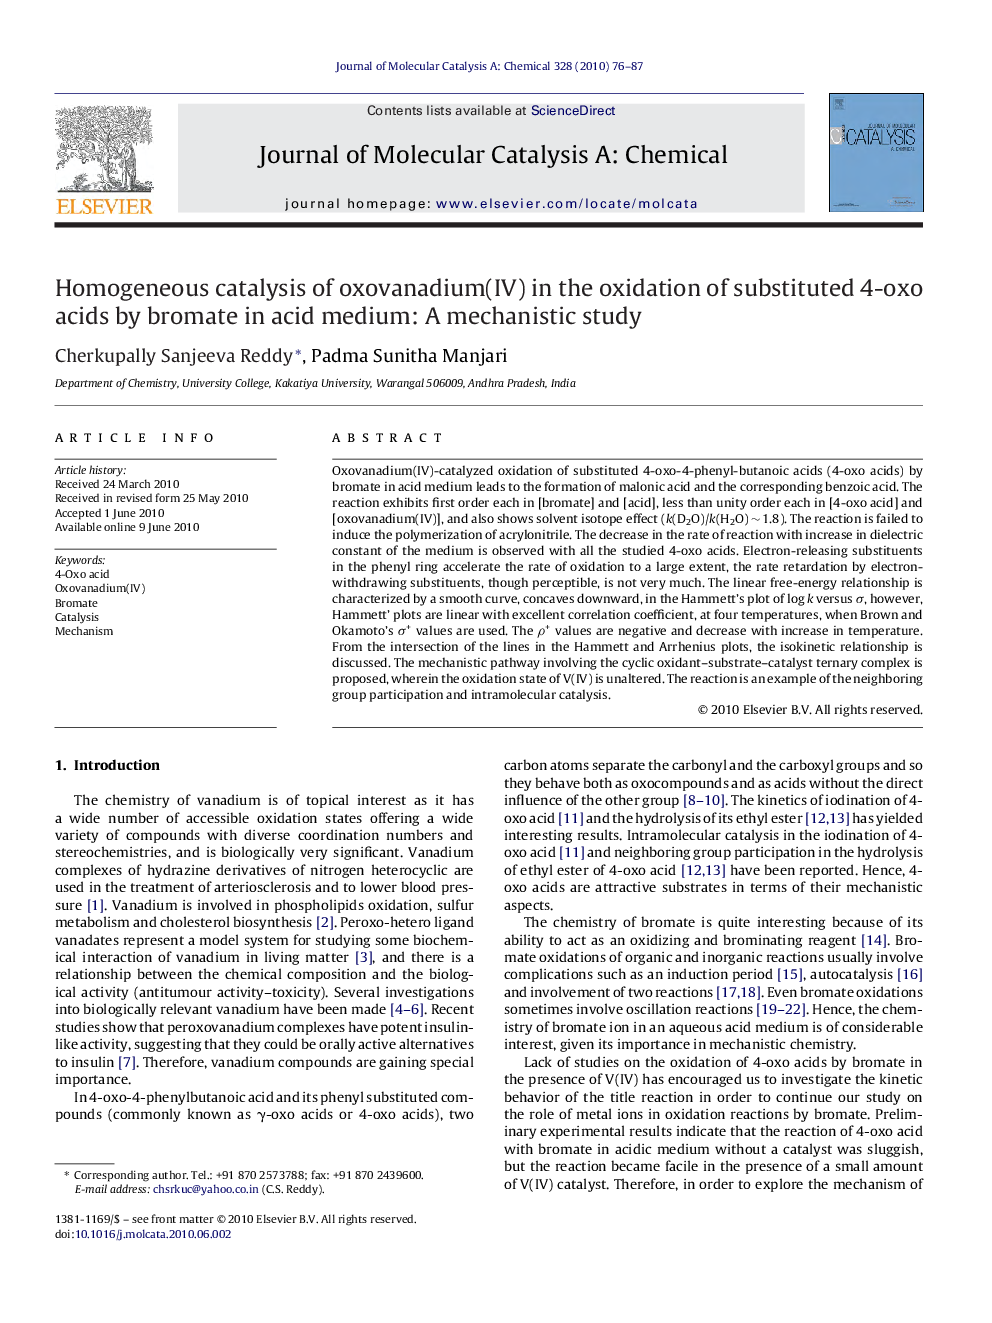 Homogeneous catalysis of oxovanadium(IV) in the oxidation of substituted 4-oxo acids by bromate in acid medium: A mechanistic study